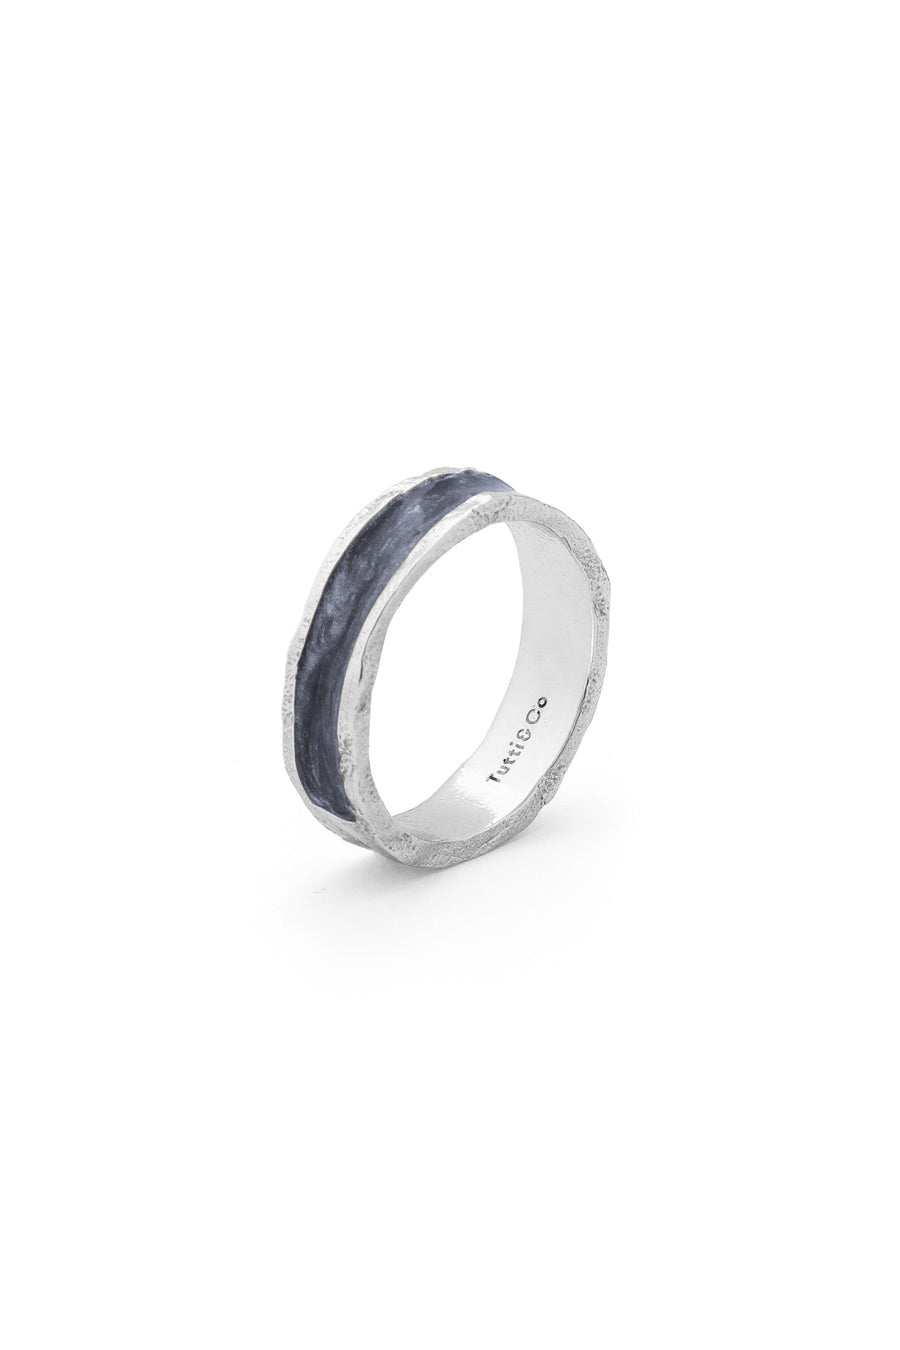 Affinity Silver Ring